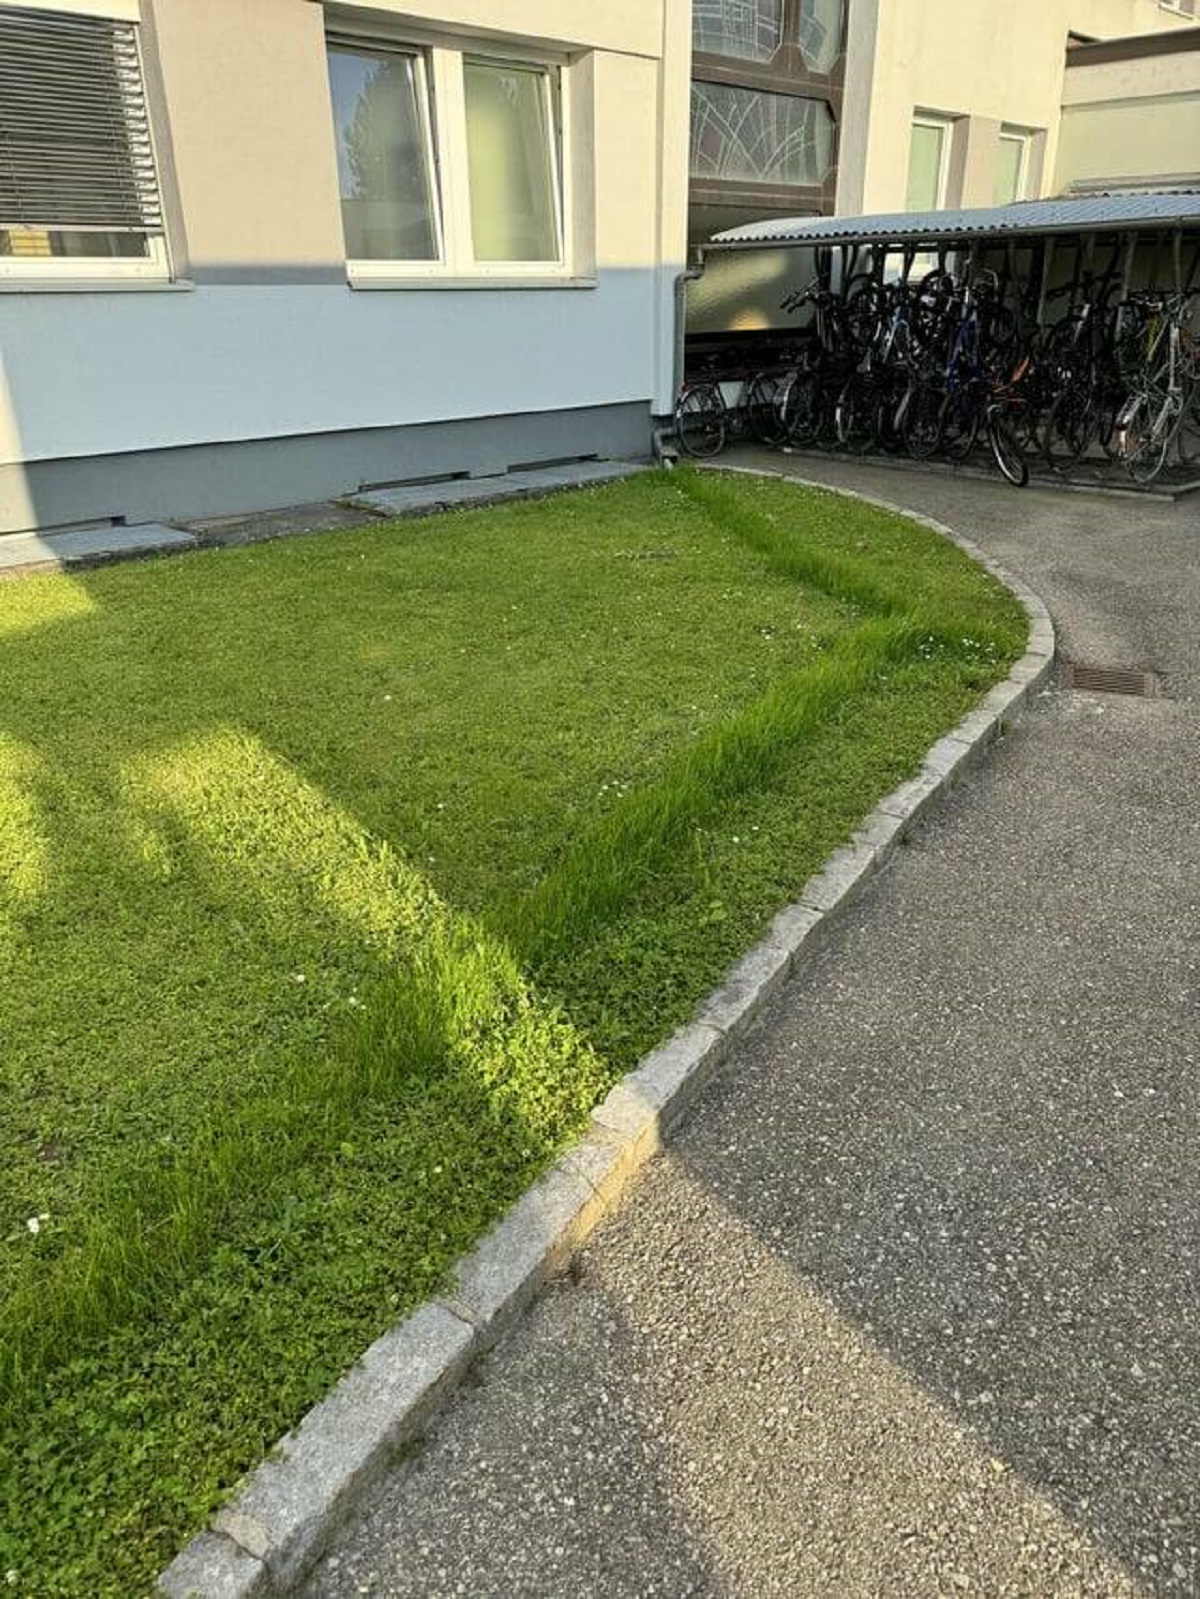 "The grass above the underlying drainage pipes grows way faster than the rest"